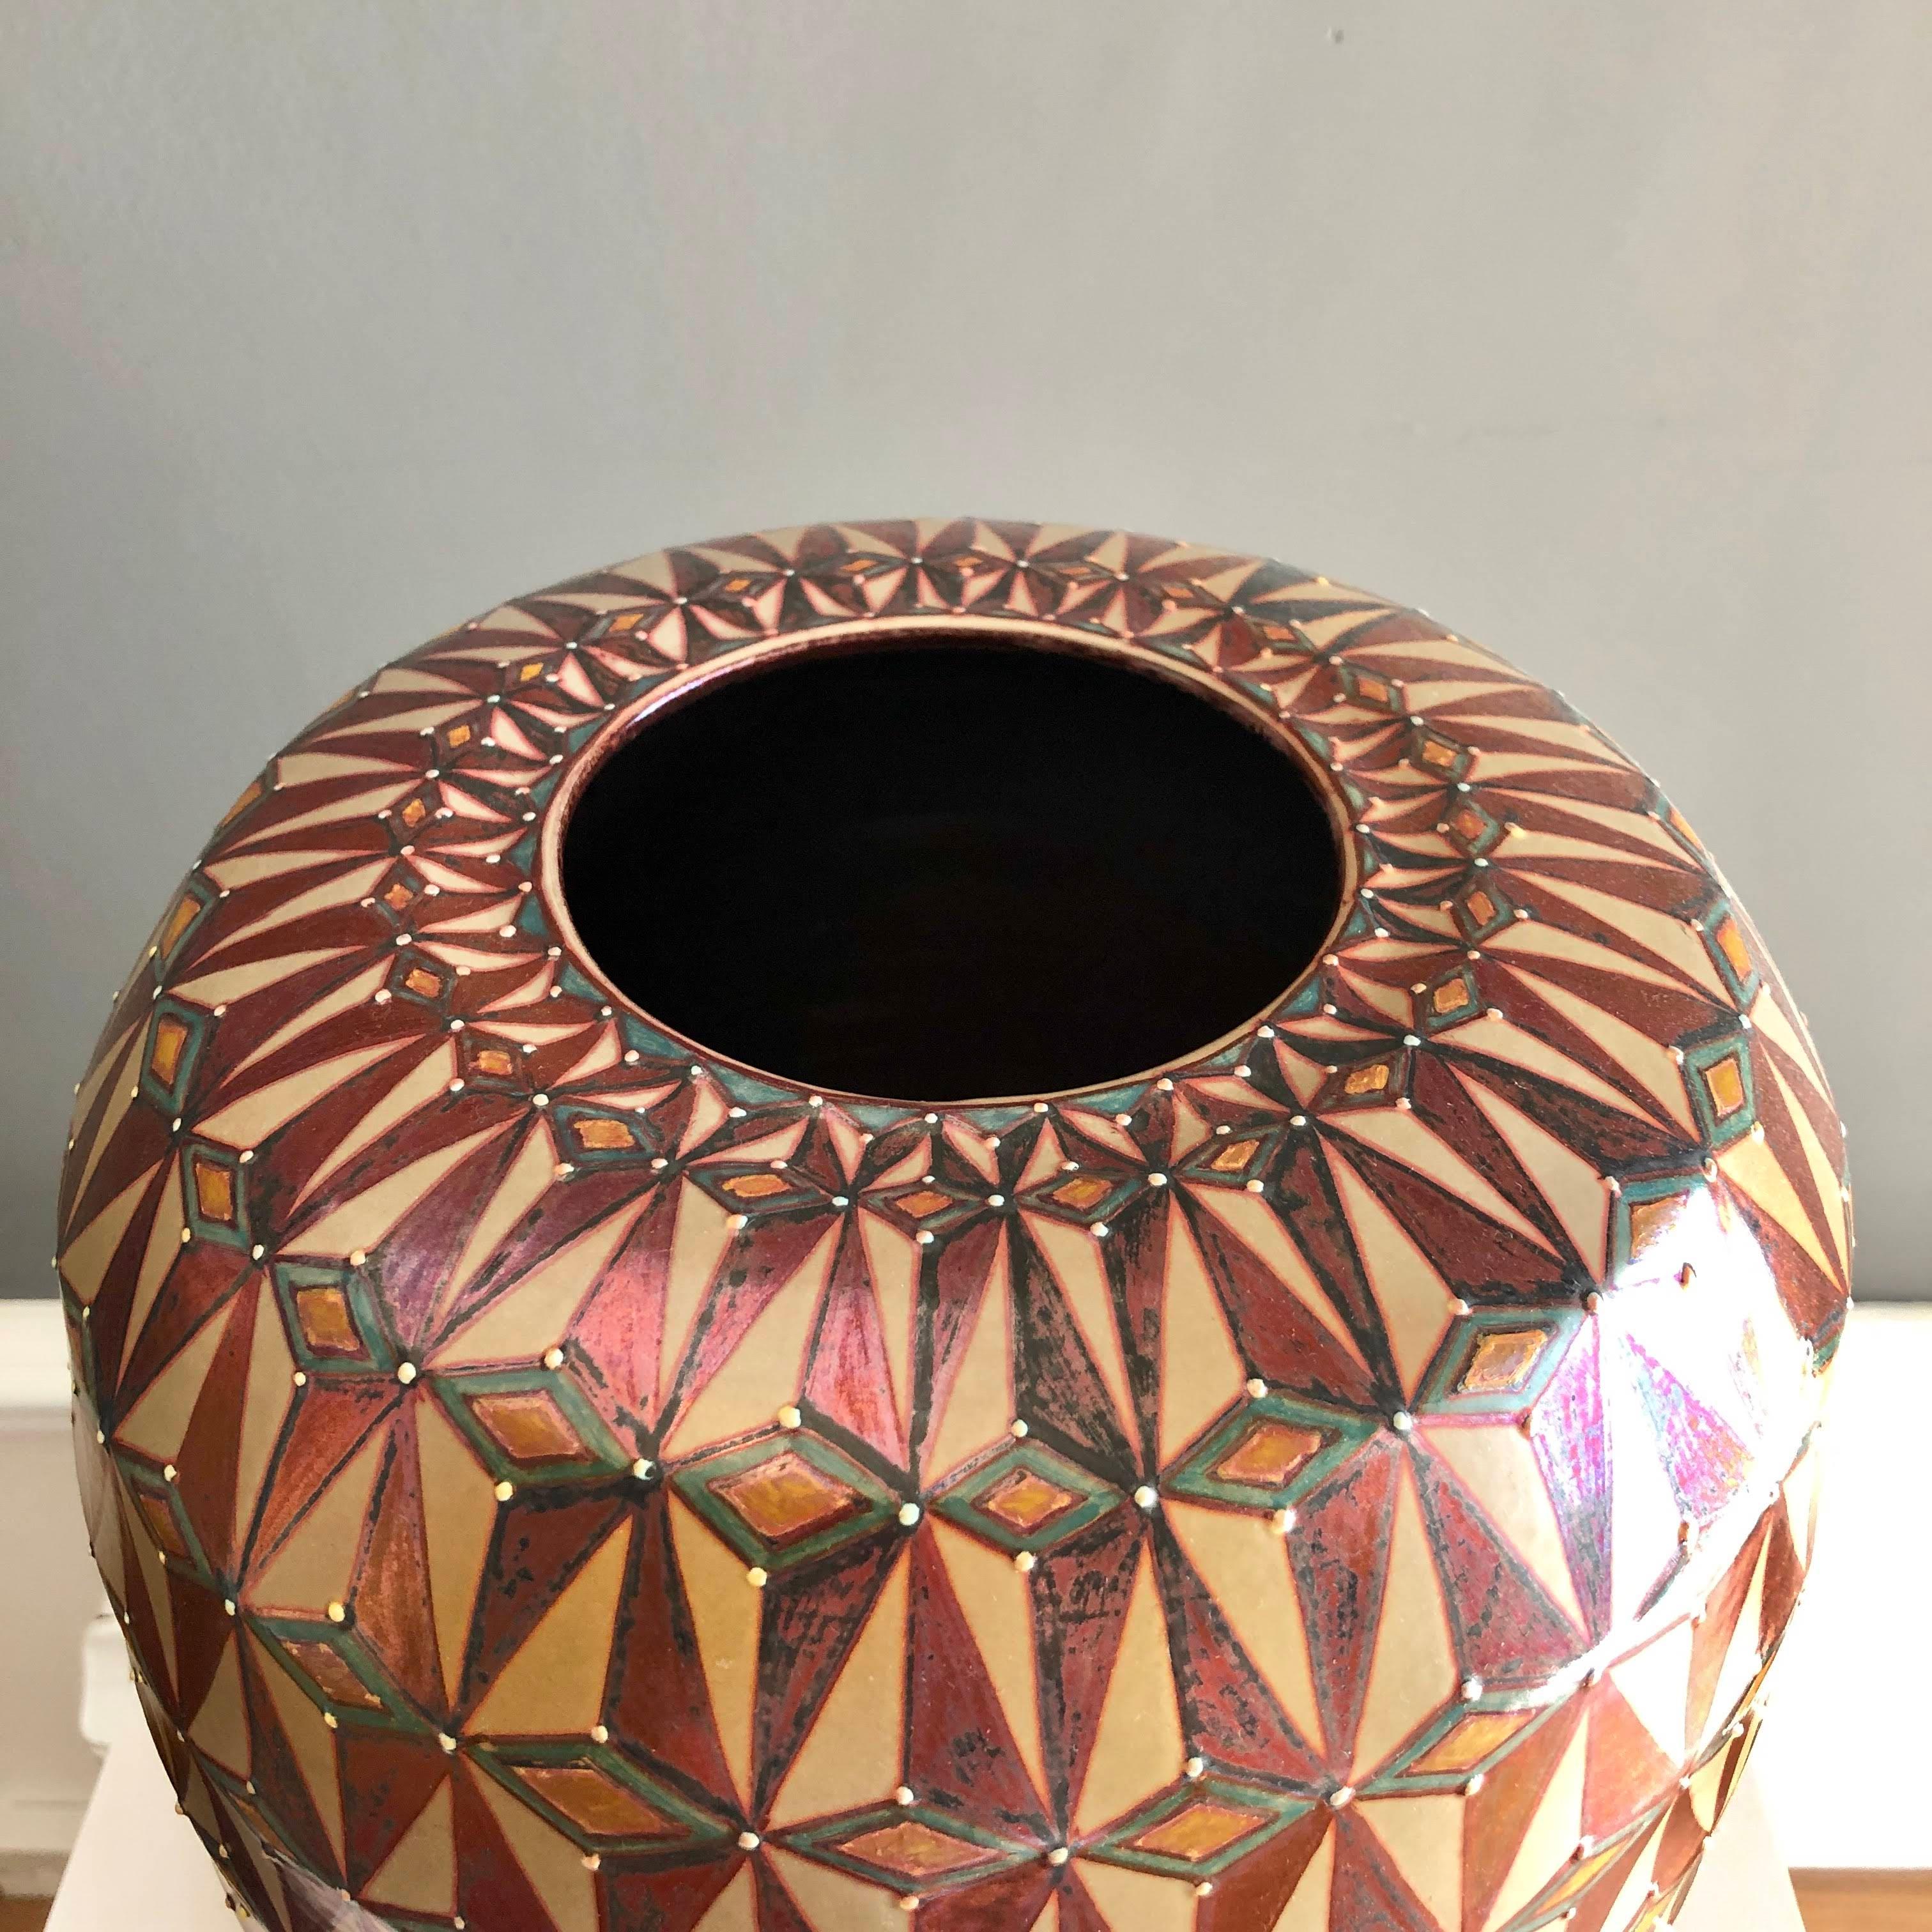 Orvieto Vase, full-fire reduction faience earthenware 26 x 34 cm, unique piece, 2017.
A unique and stylish gift idea for the upcoming Holidays!
Bottega Vignoli is a brand of artistic ceramics based in Faenza, one of the most representative ceramic